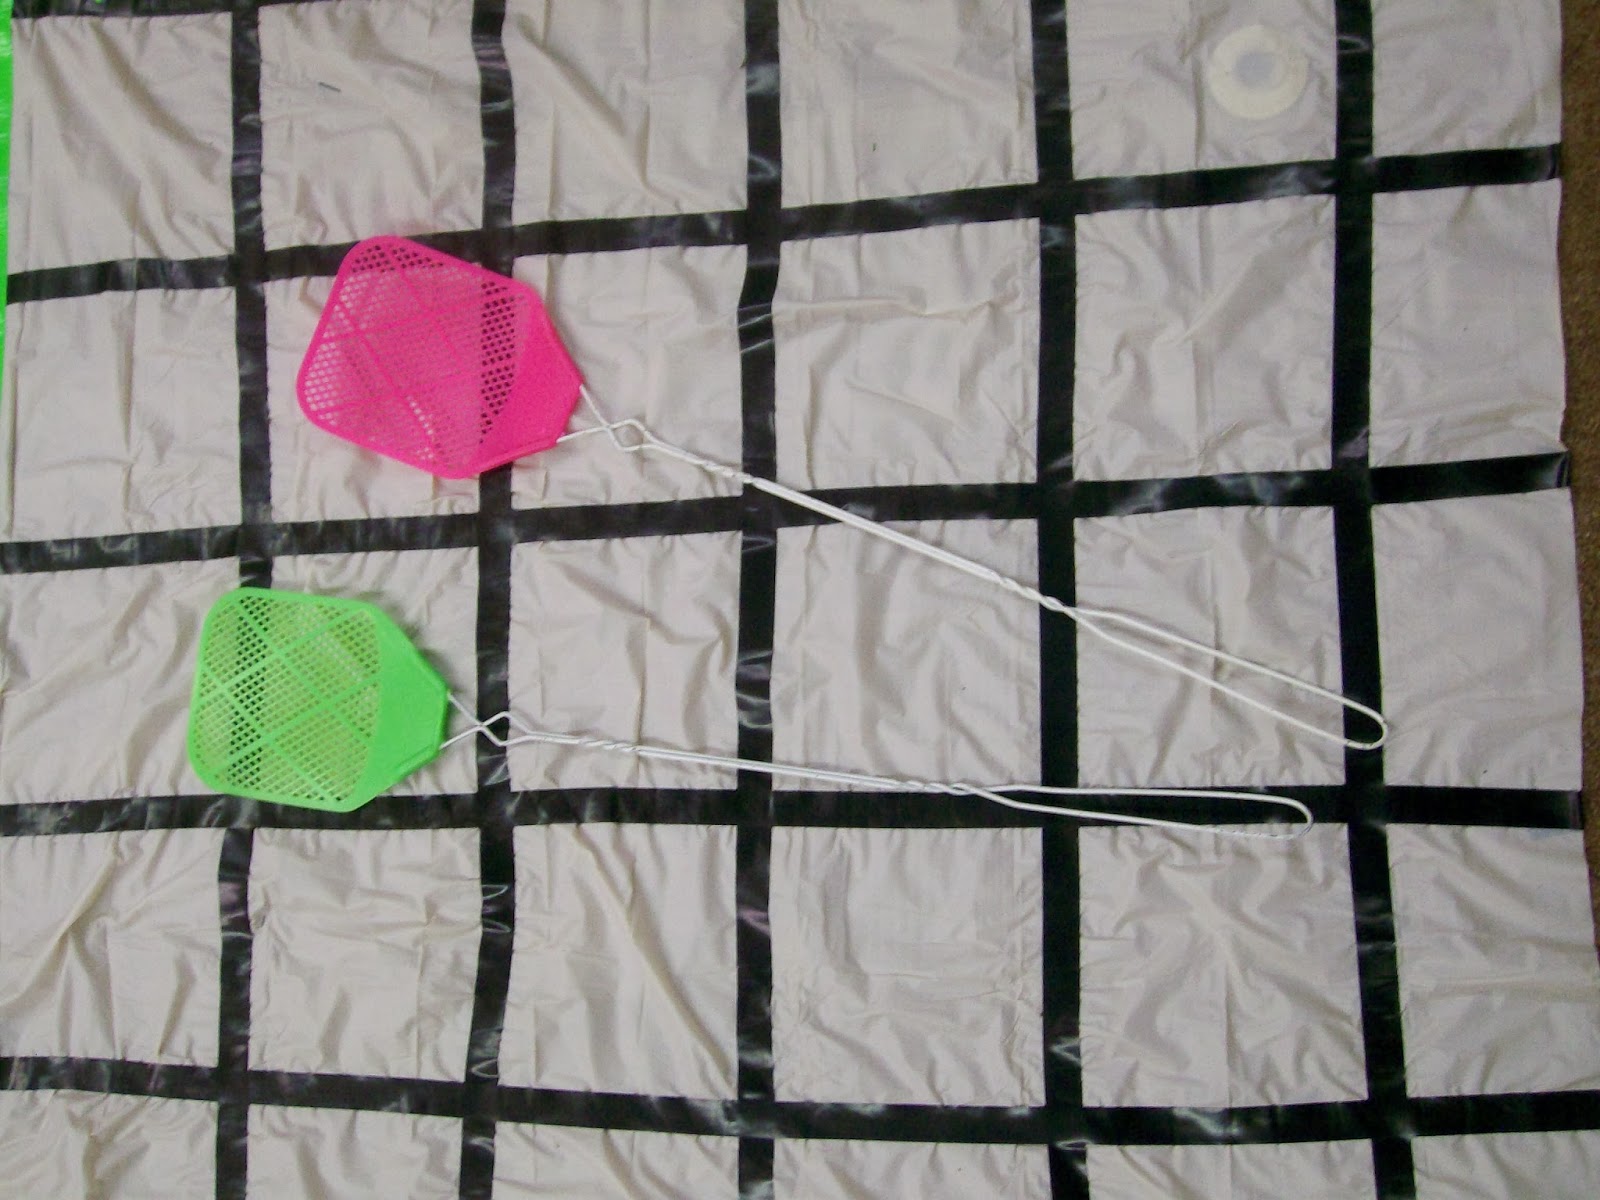 coordinate plane fly swatter game